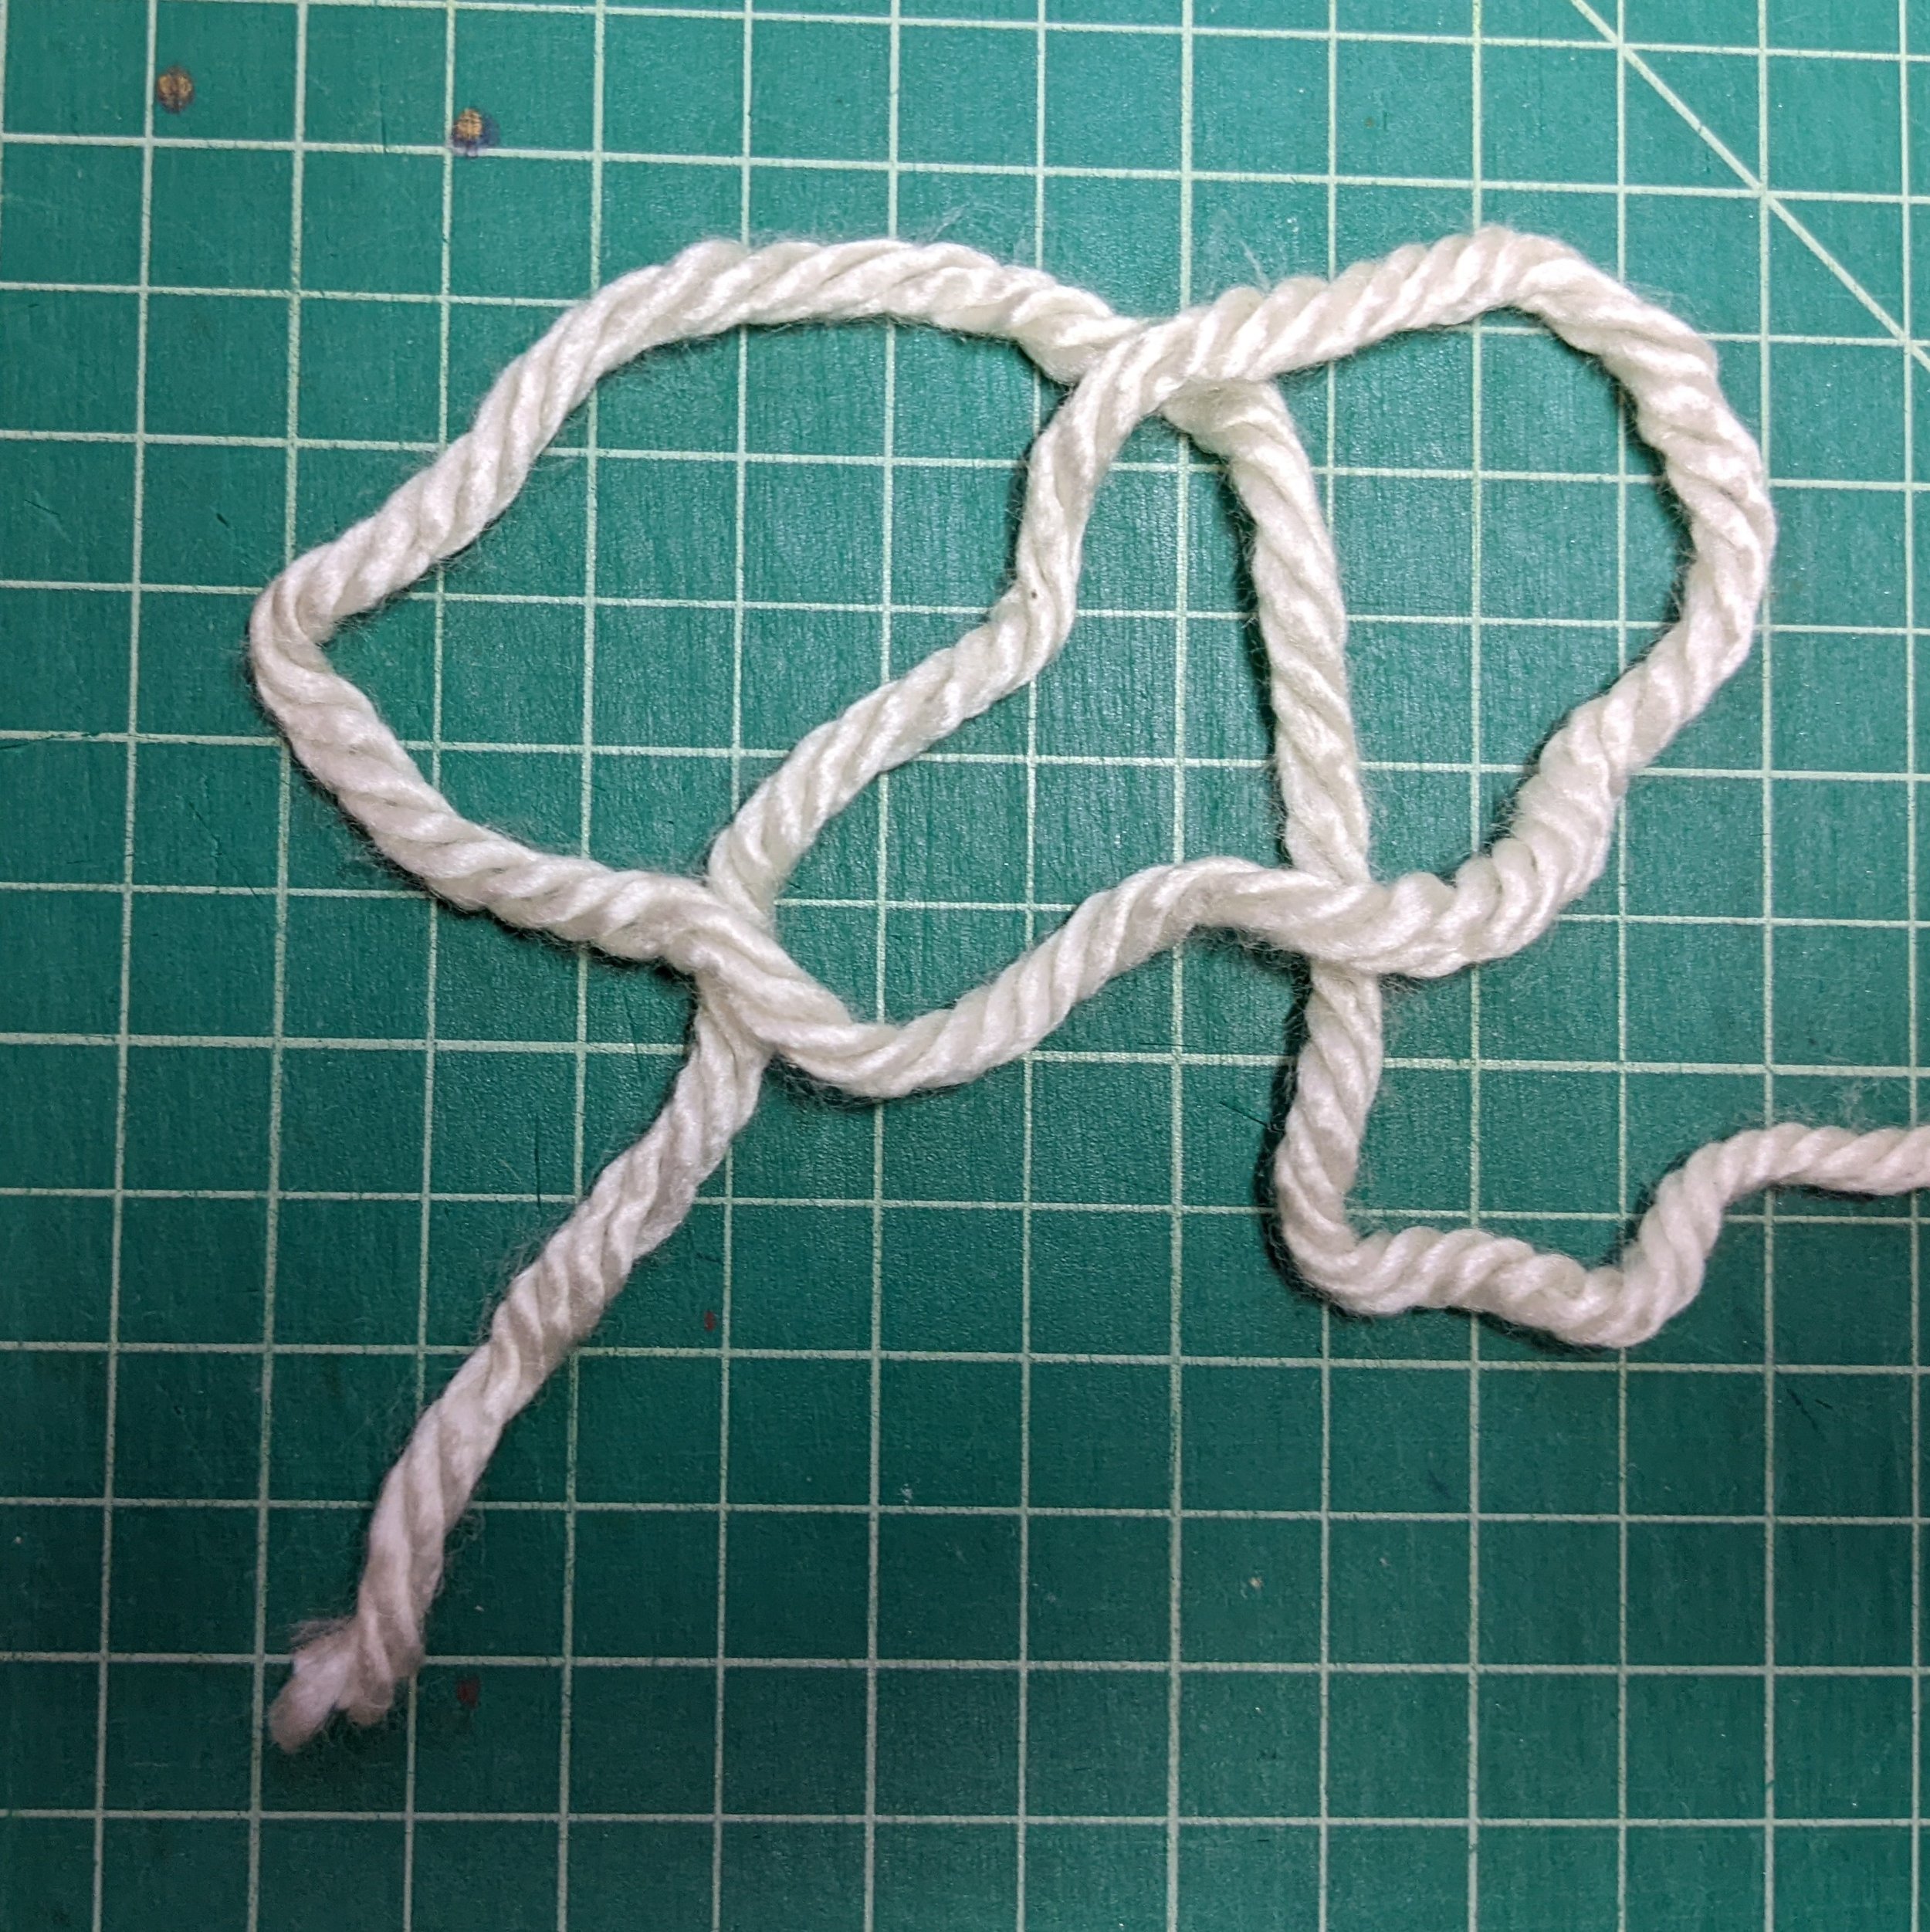 Step 4: Lay the loop back down and you should have a sort of pretzel shape